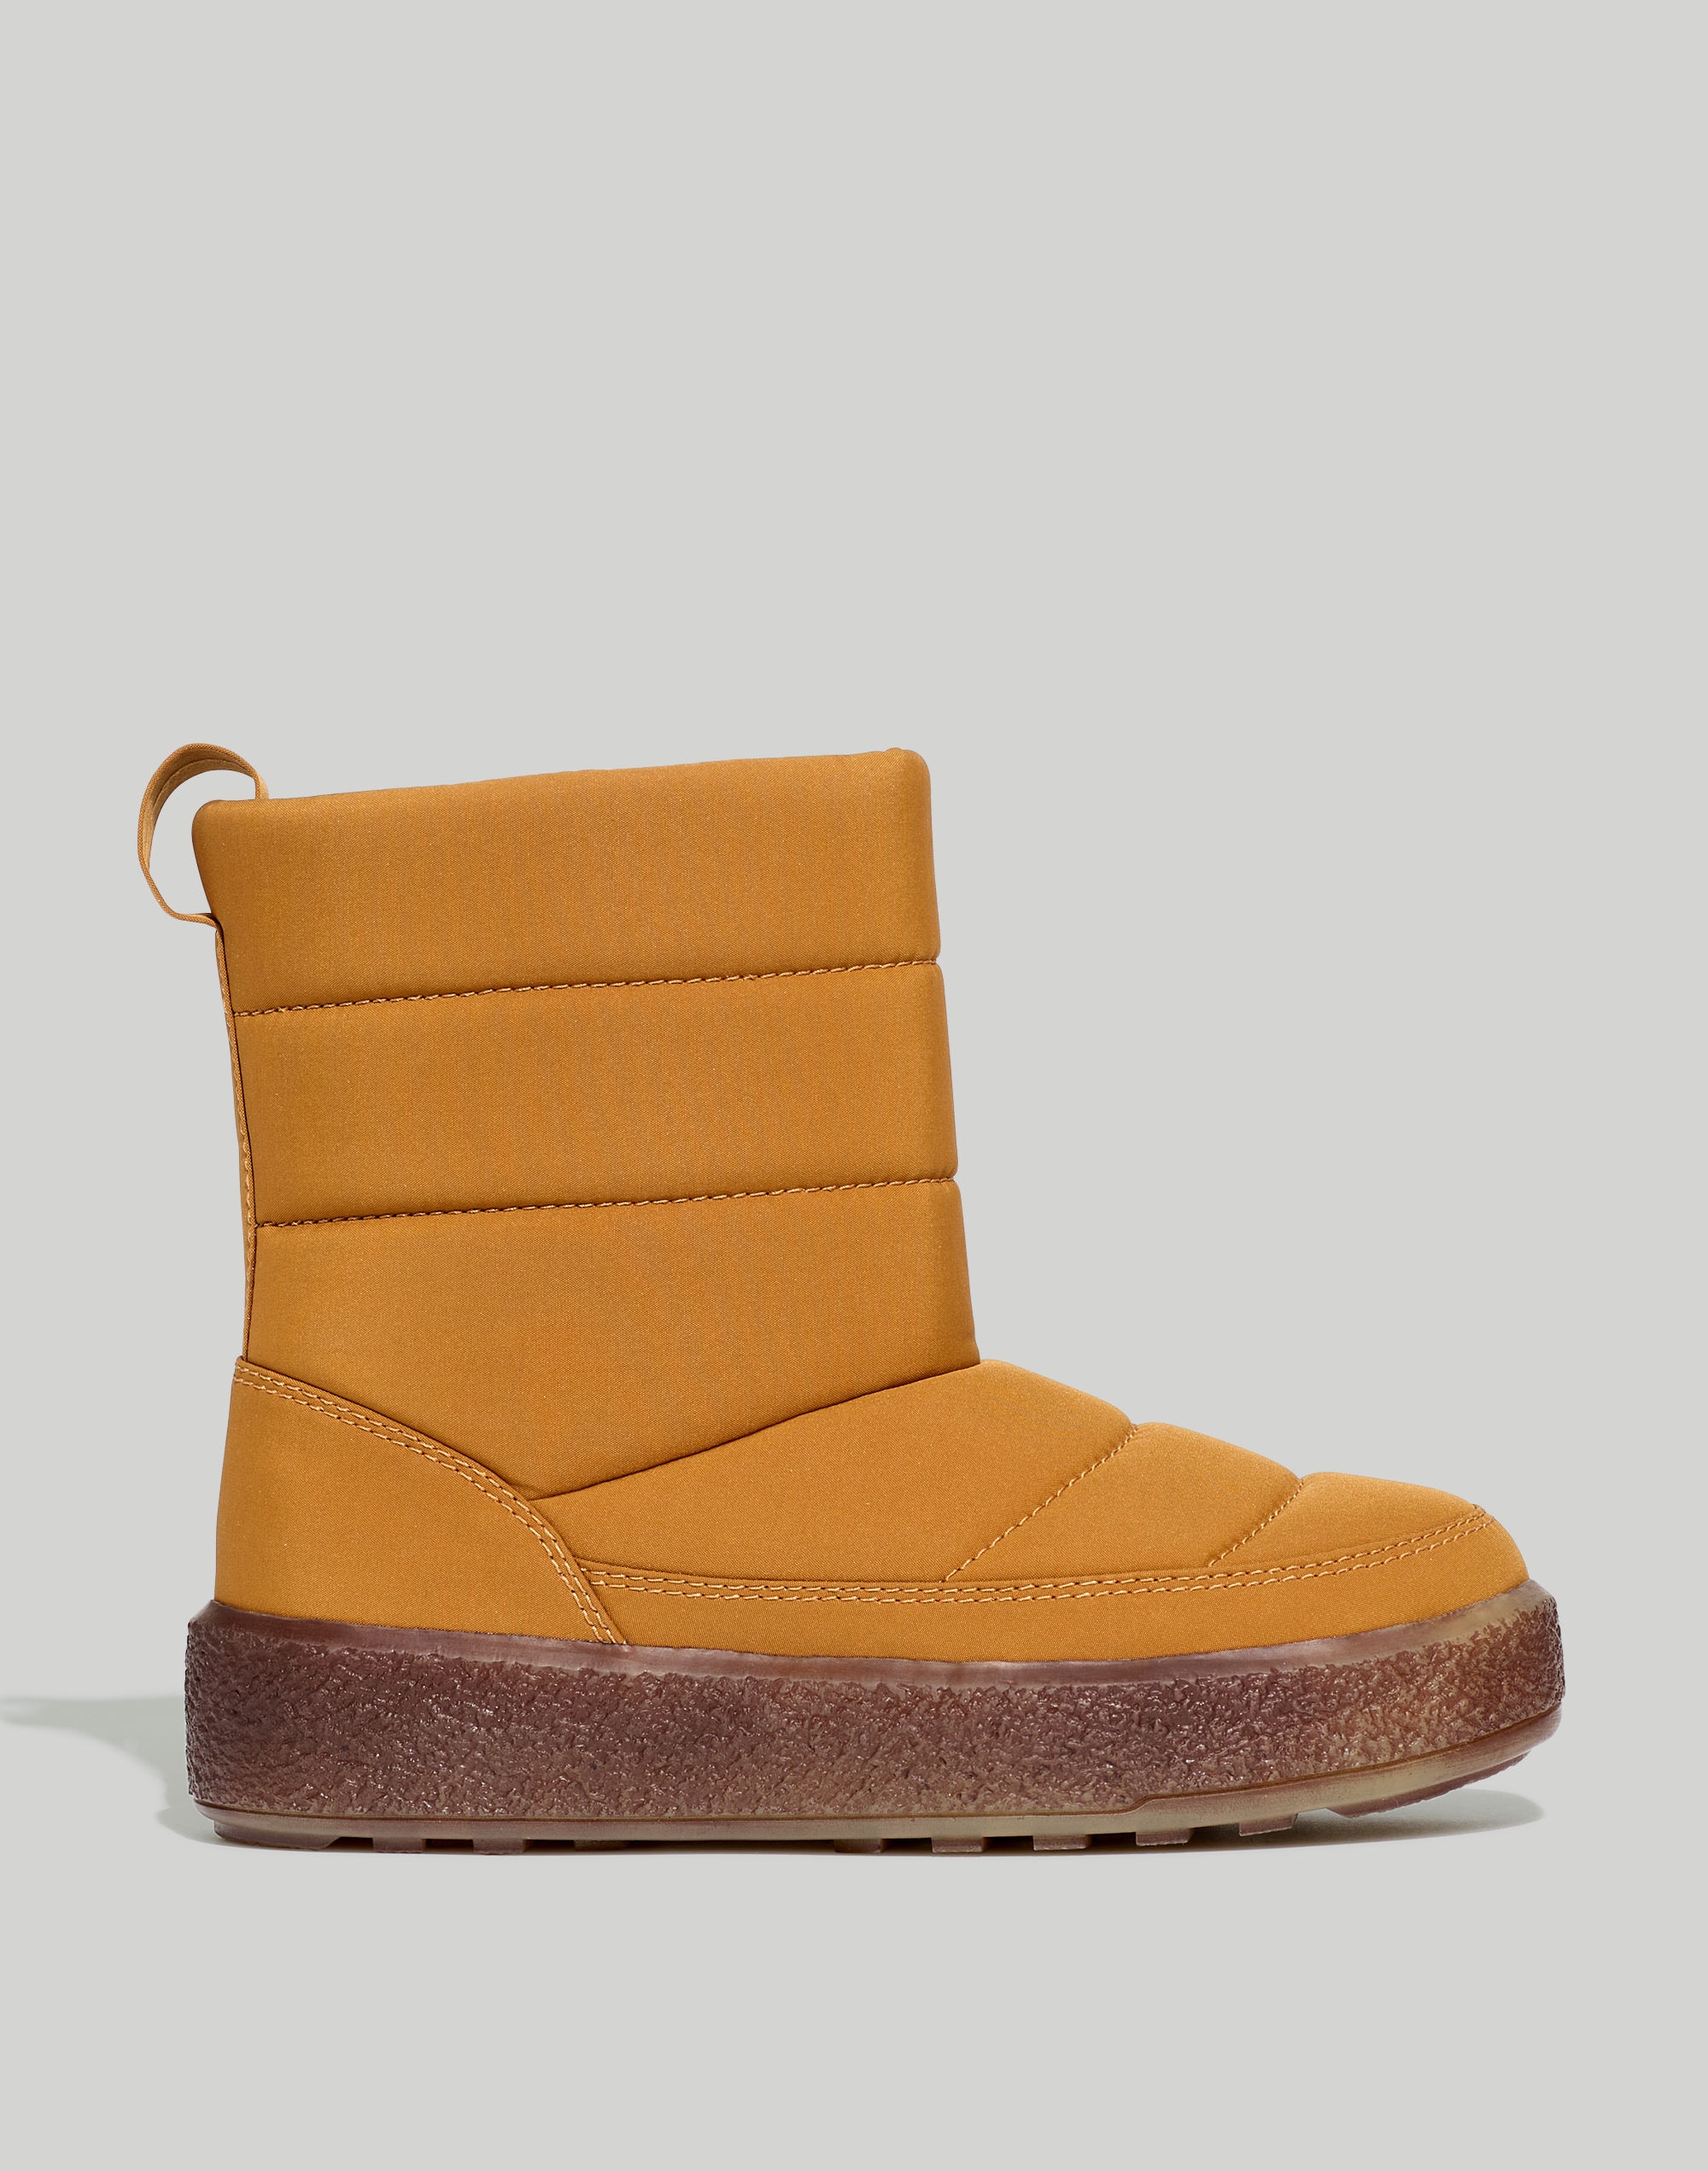 The Toasty Puffer Boot